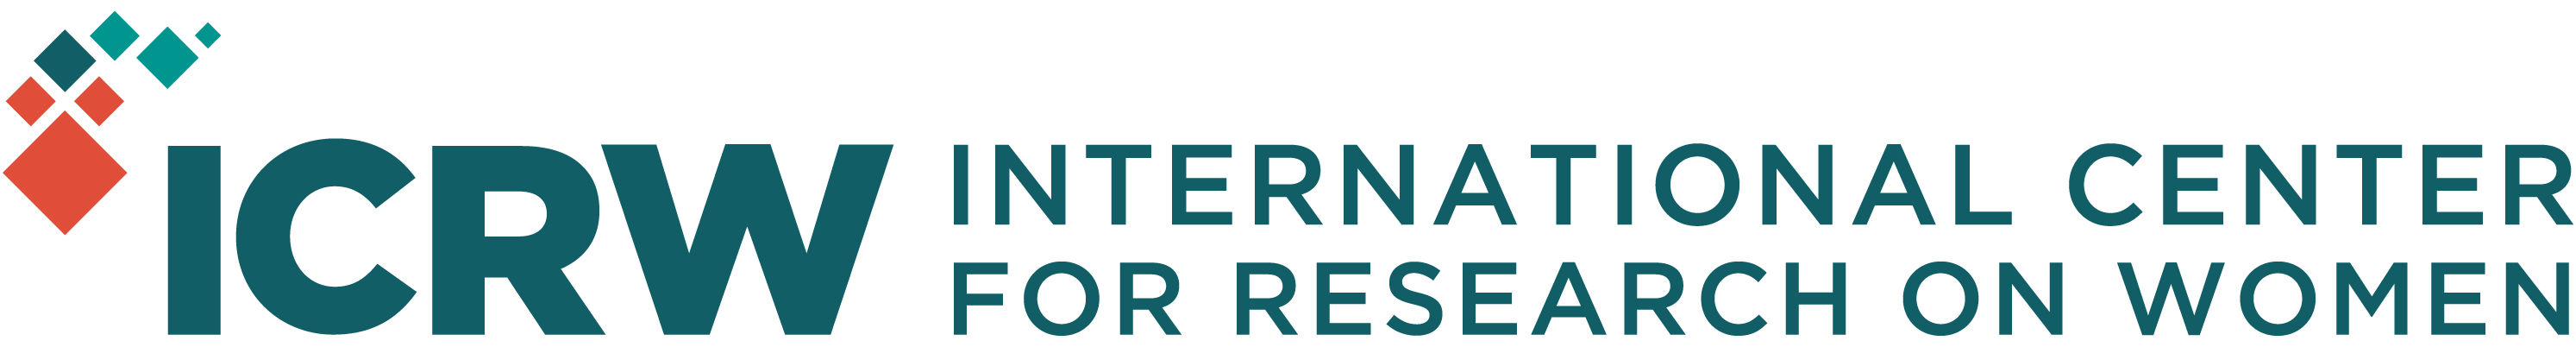 International Center for Research on Women (ICRW)is hiring for a Director of Policy & Advocacy